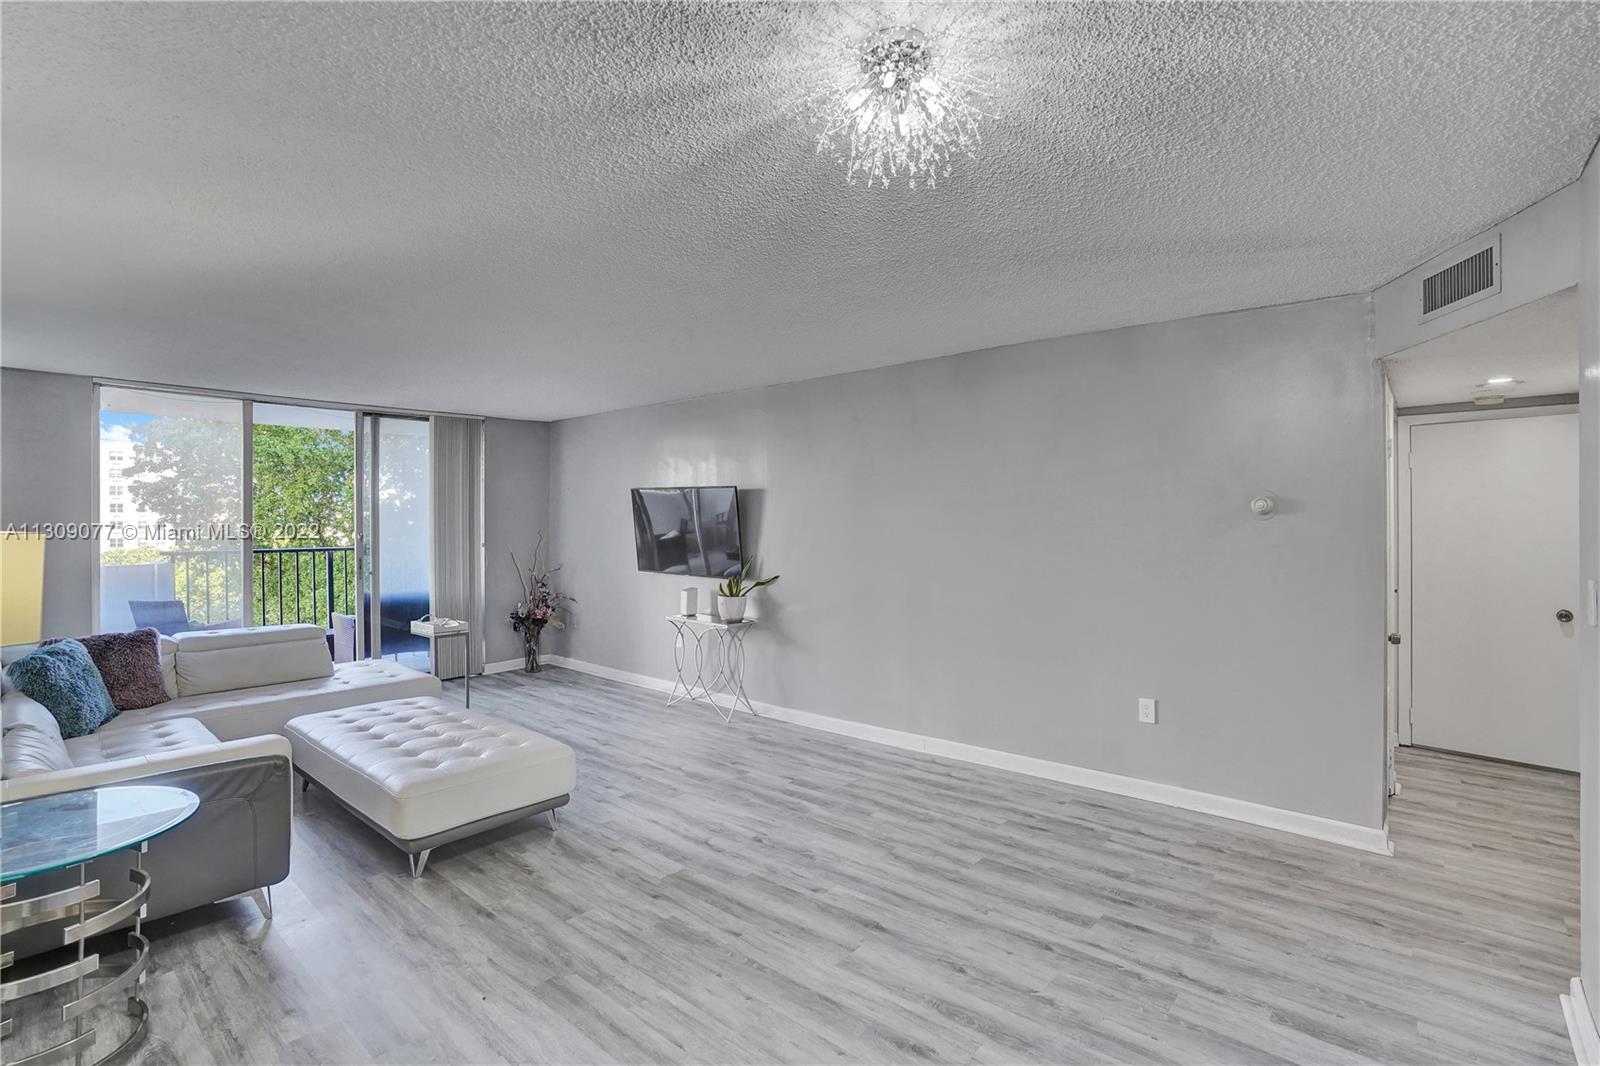 Delightfully remodeled and spacious 1/1.5 unit in the heart of Aventura. New flooring throughout wit